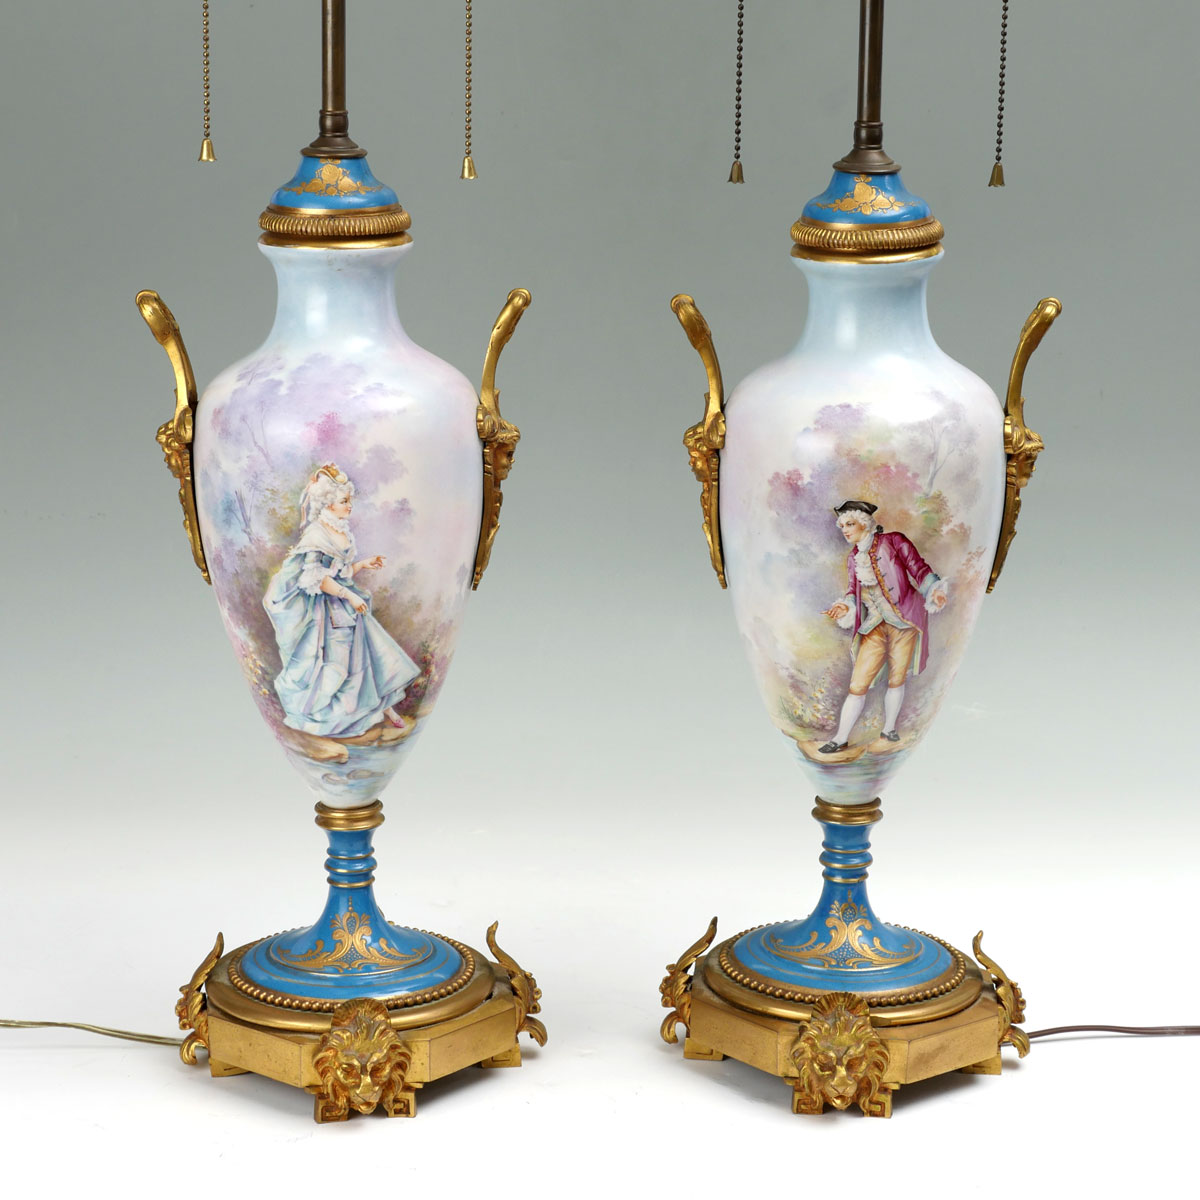 PAIR OF SEVRES TABLE LAMPS 2 Sevres 36f764